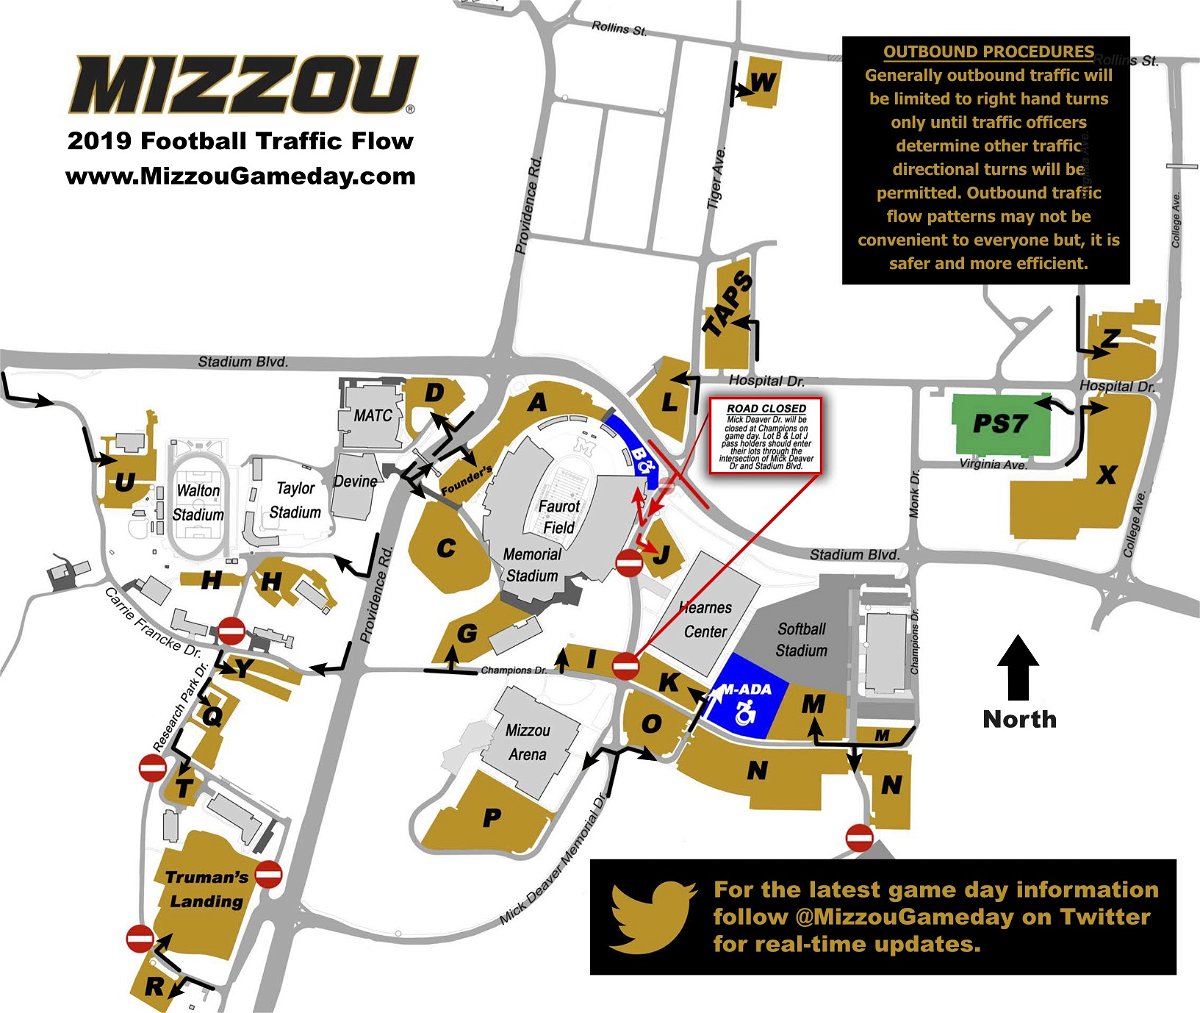 University of Missouri parade and football game to cause